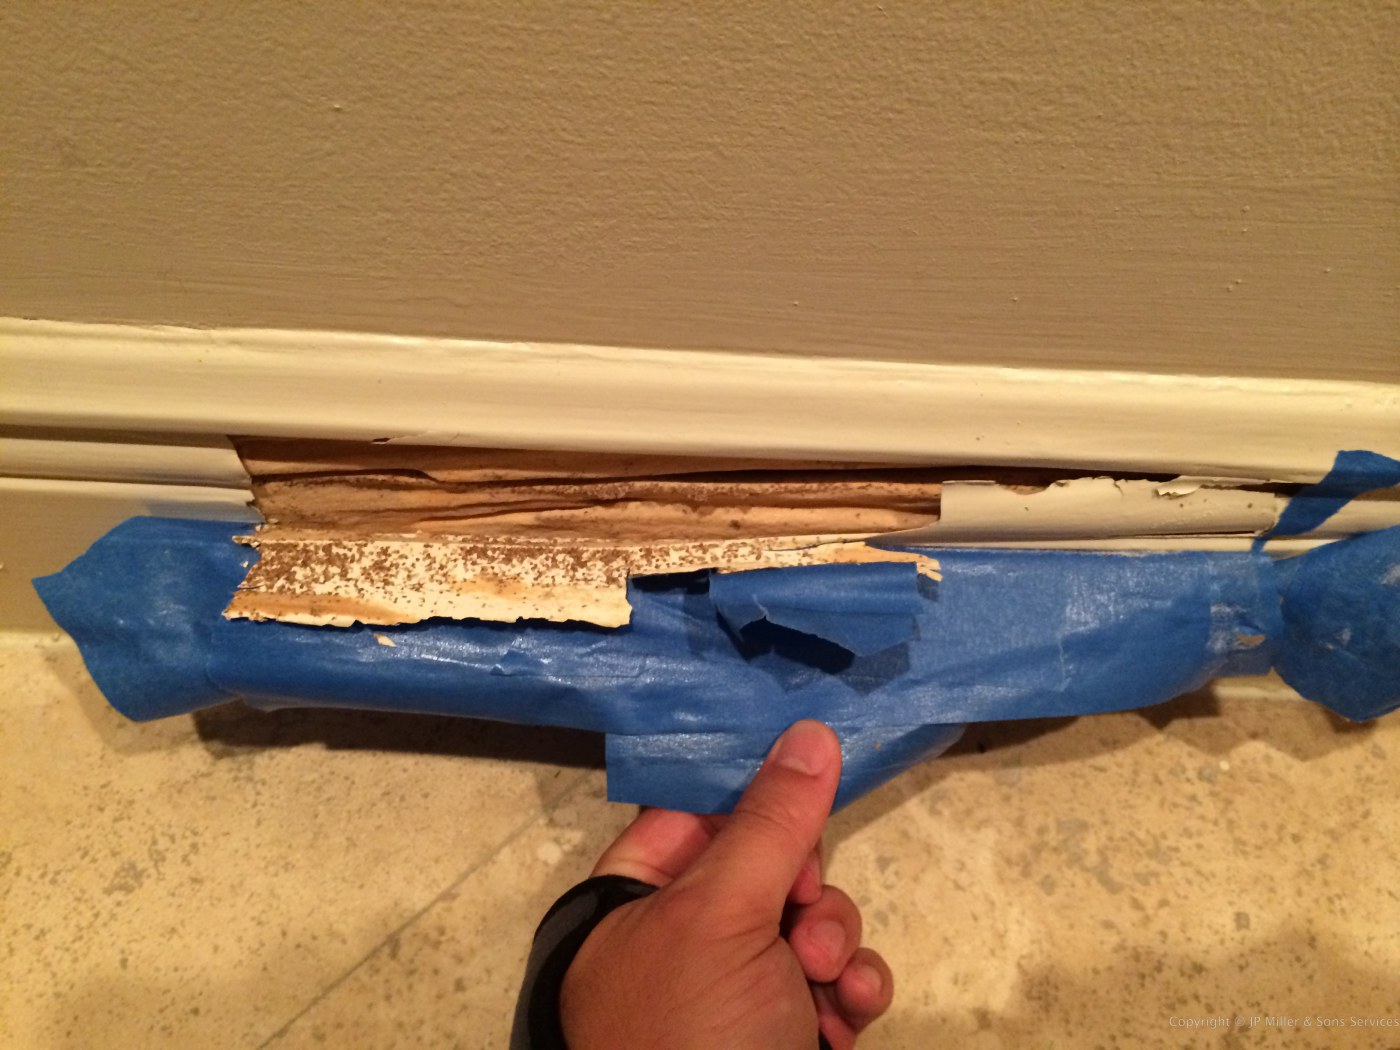 Treatment After Inspection – Termite Treatment Boca Raton, An Absolute Necessity